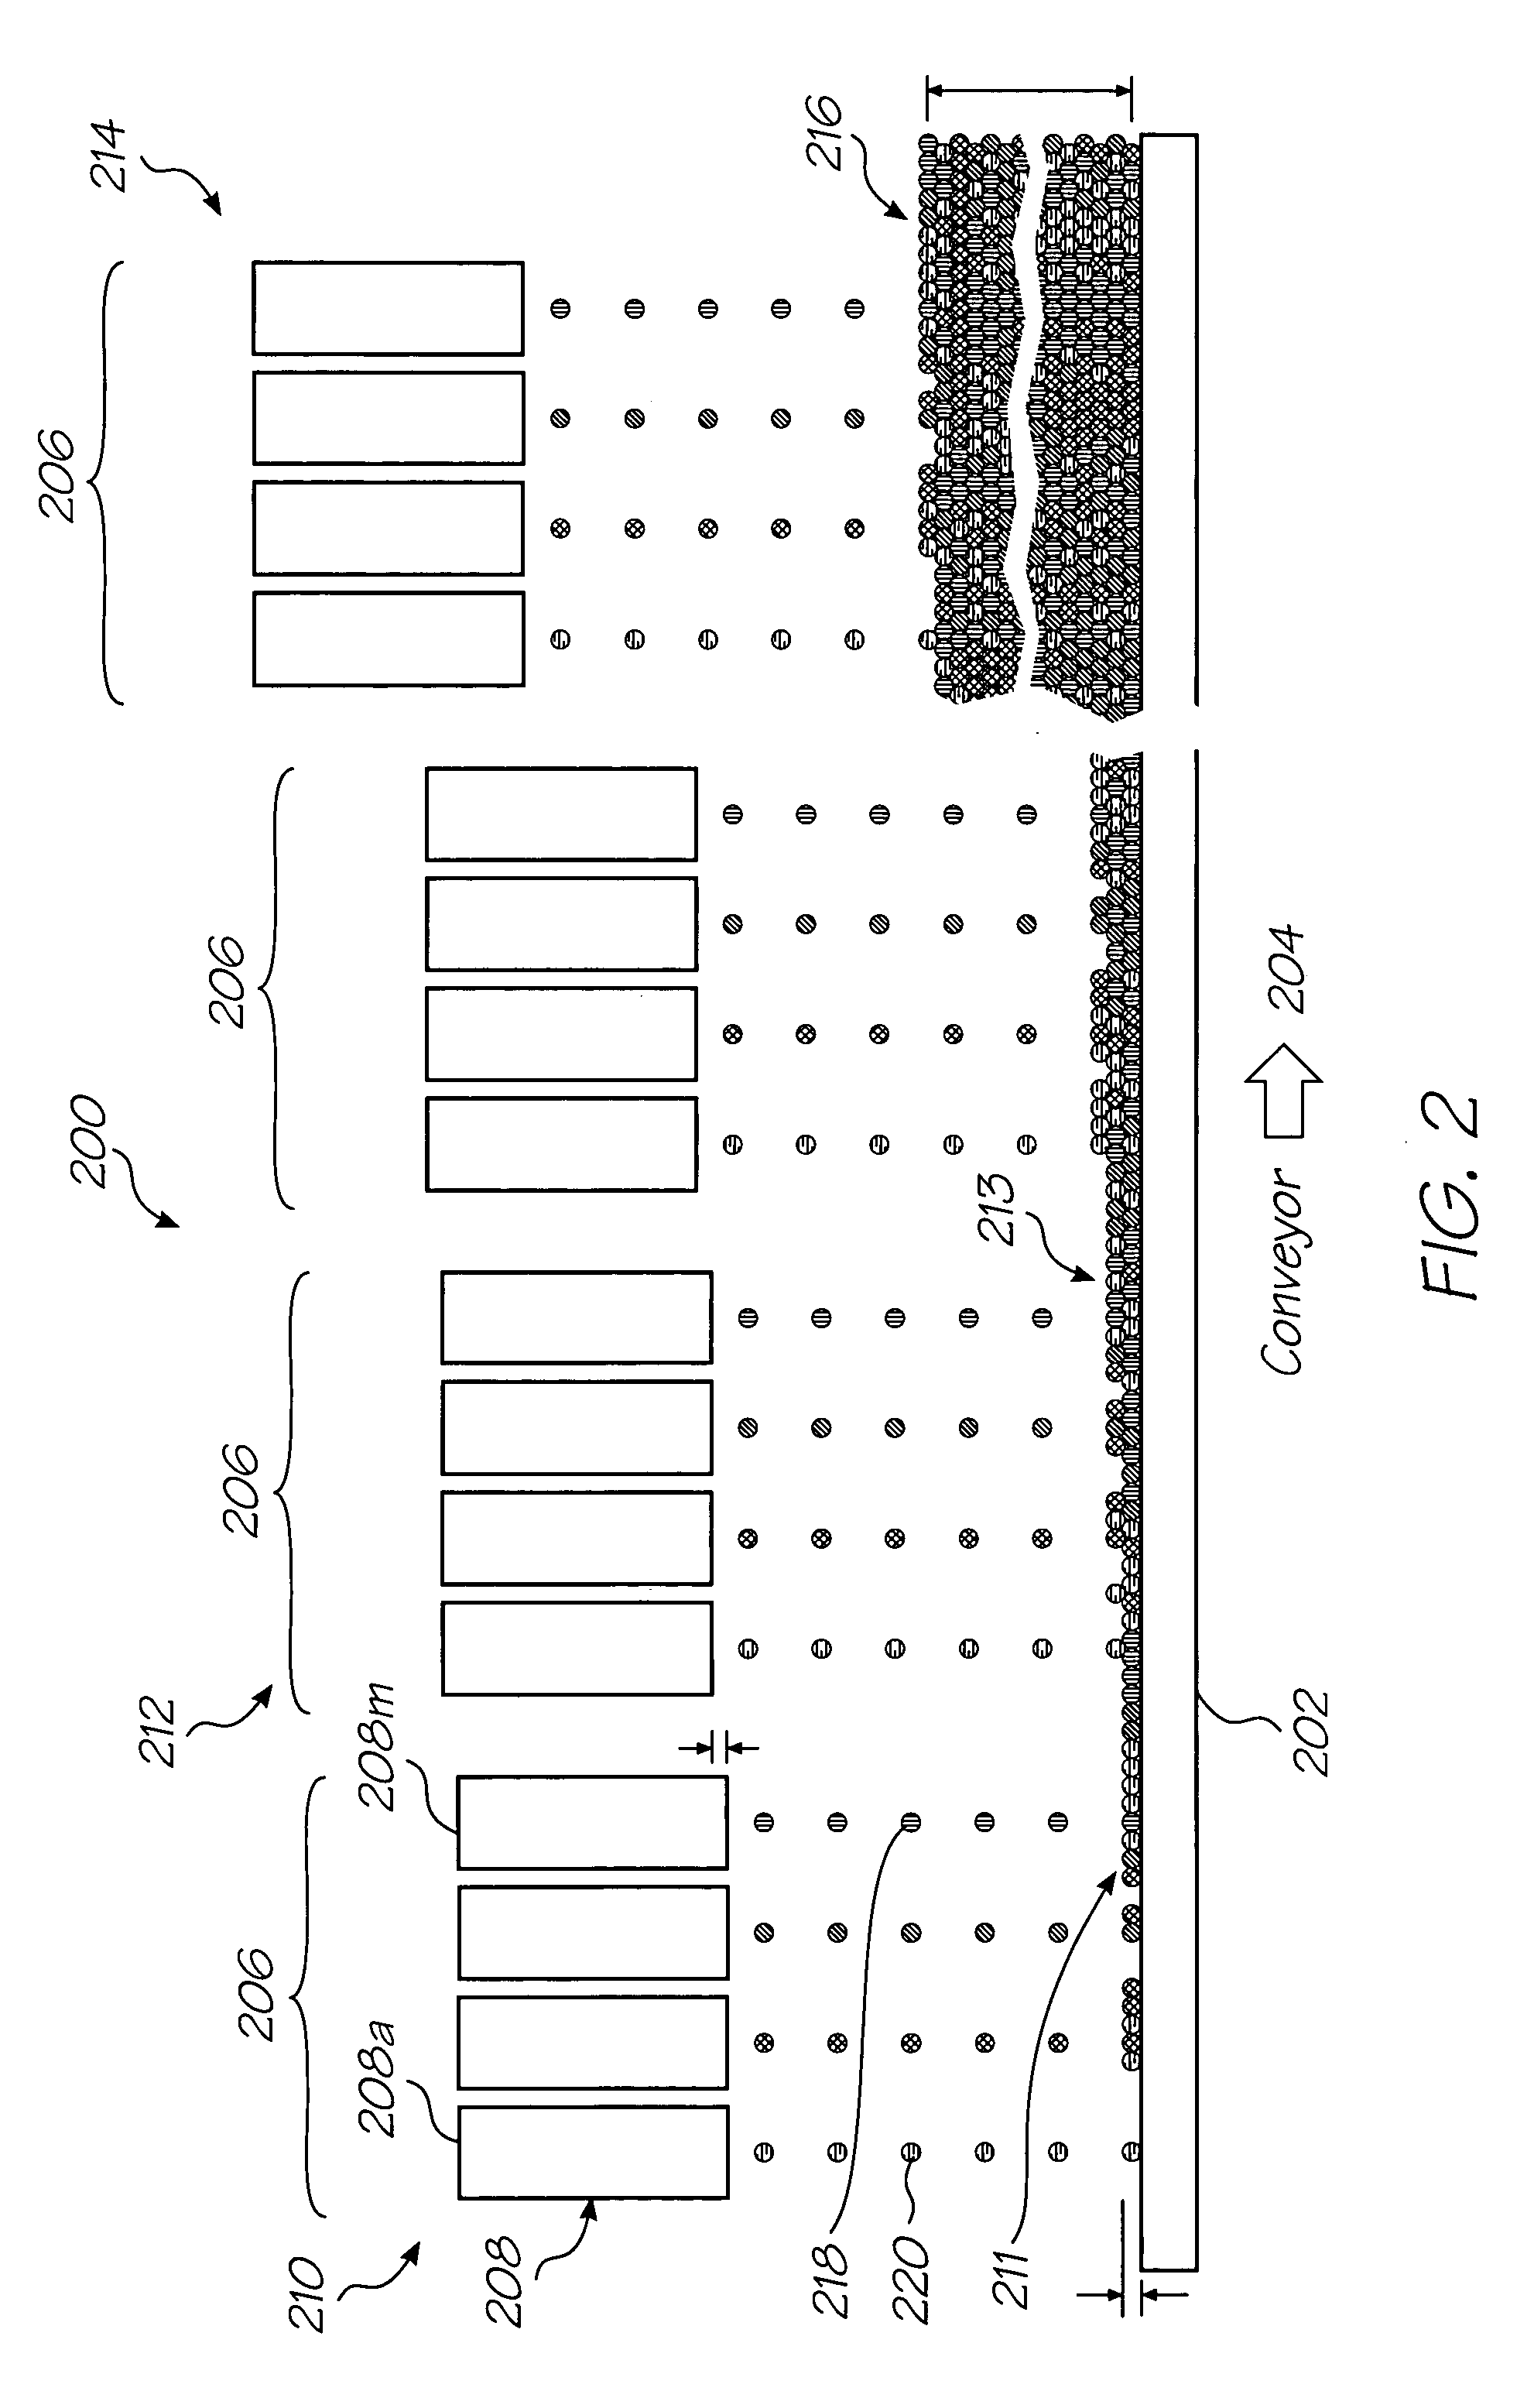 A 3-D object creation system incorporating semiconductor memory